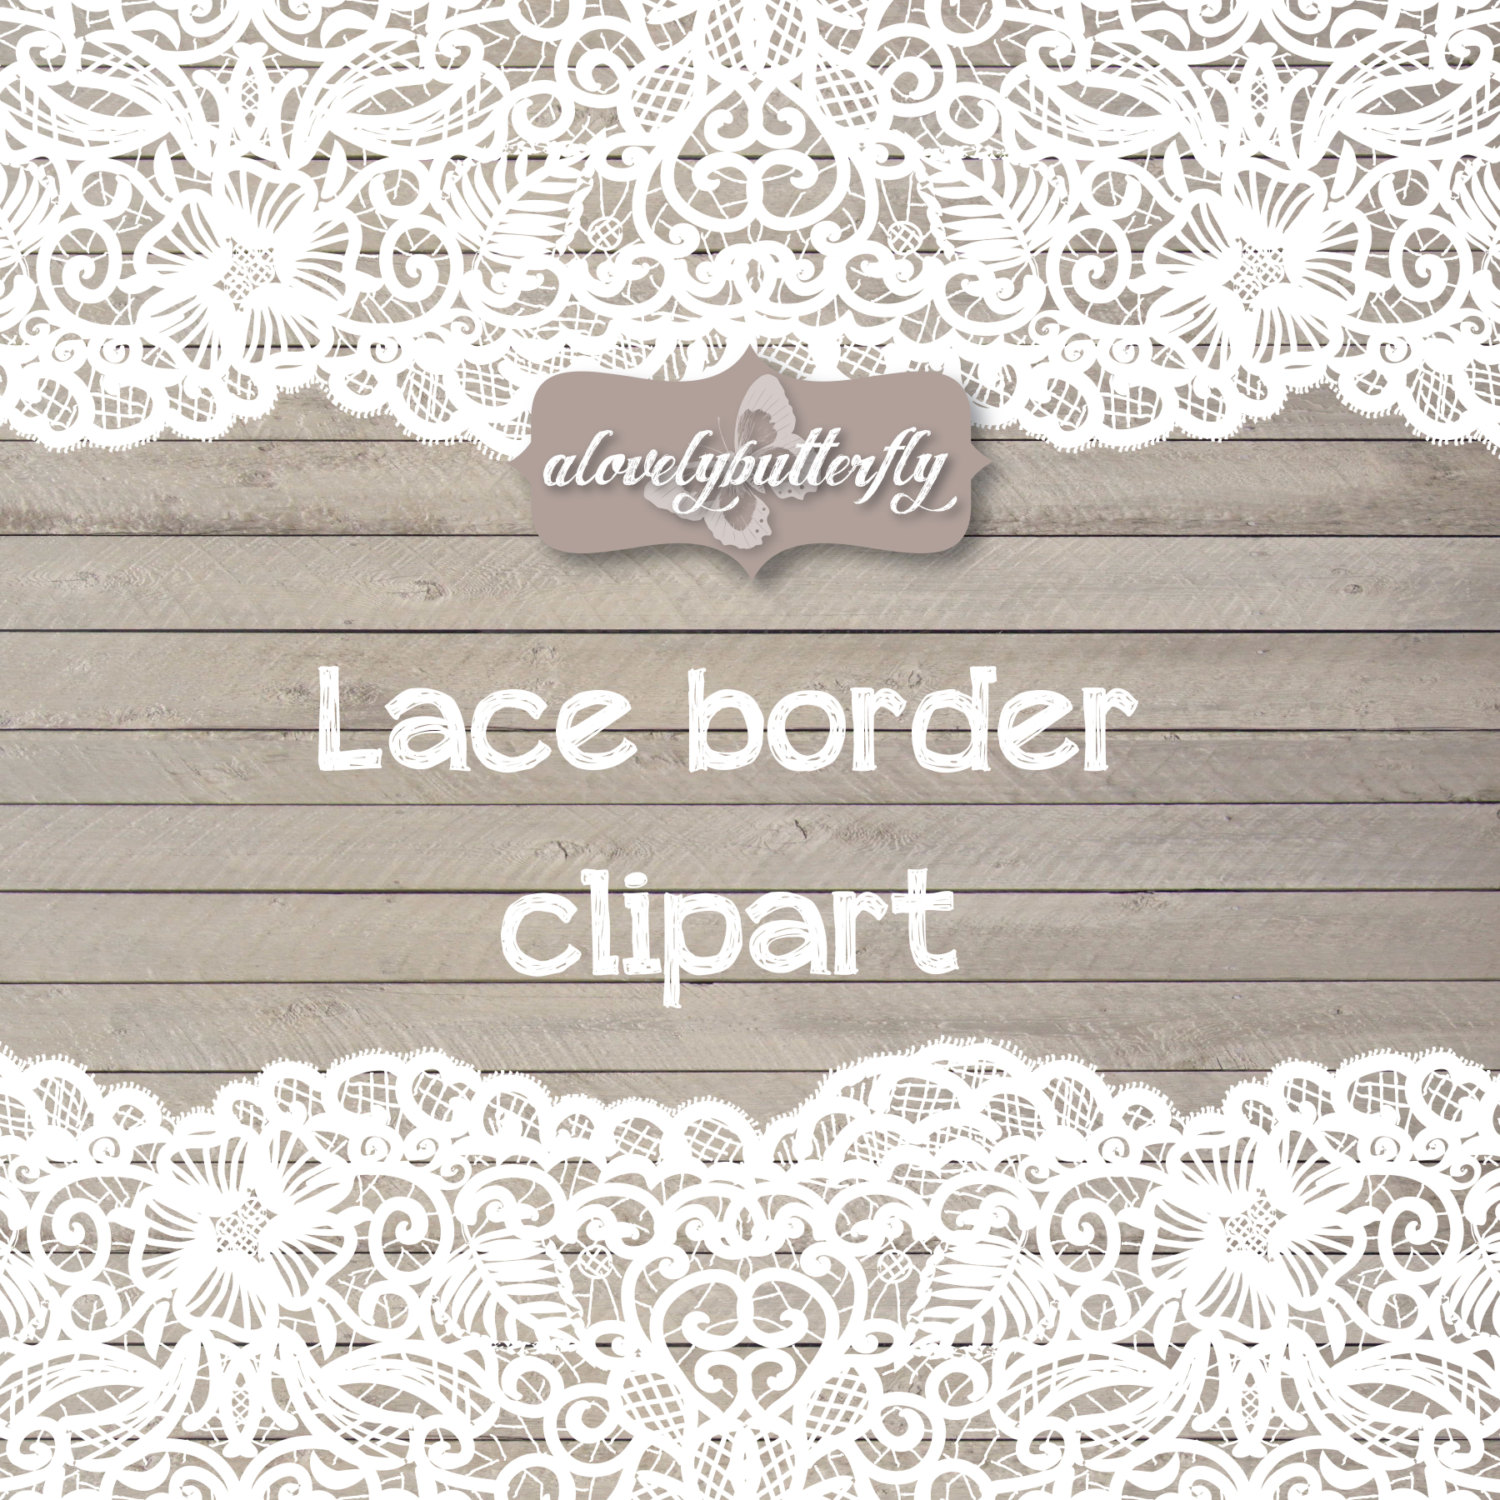 Wedding Clipart Lace Border Rustic Clipart By Alovelybutterfly